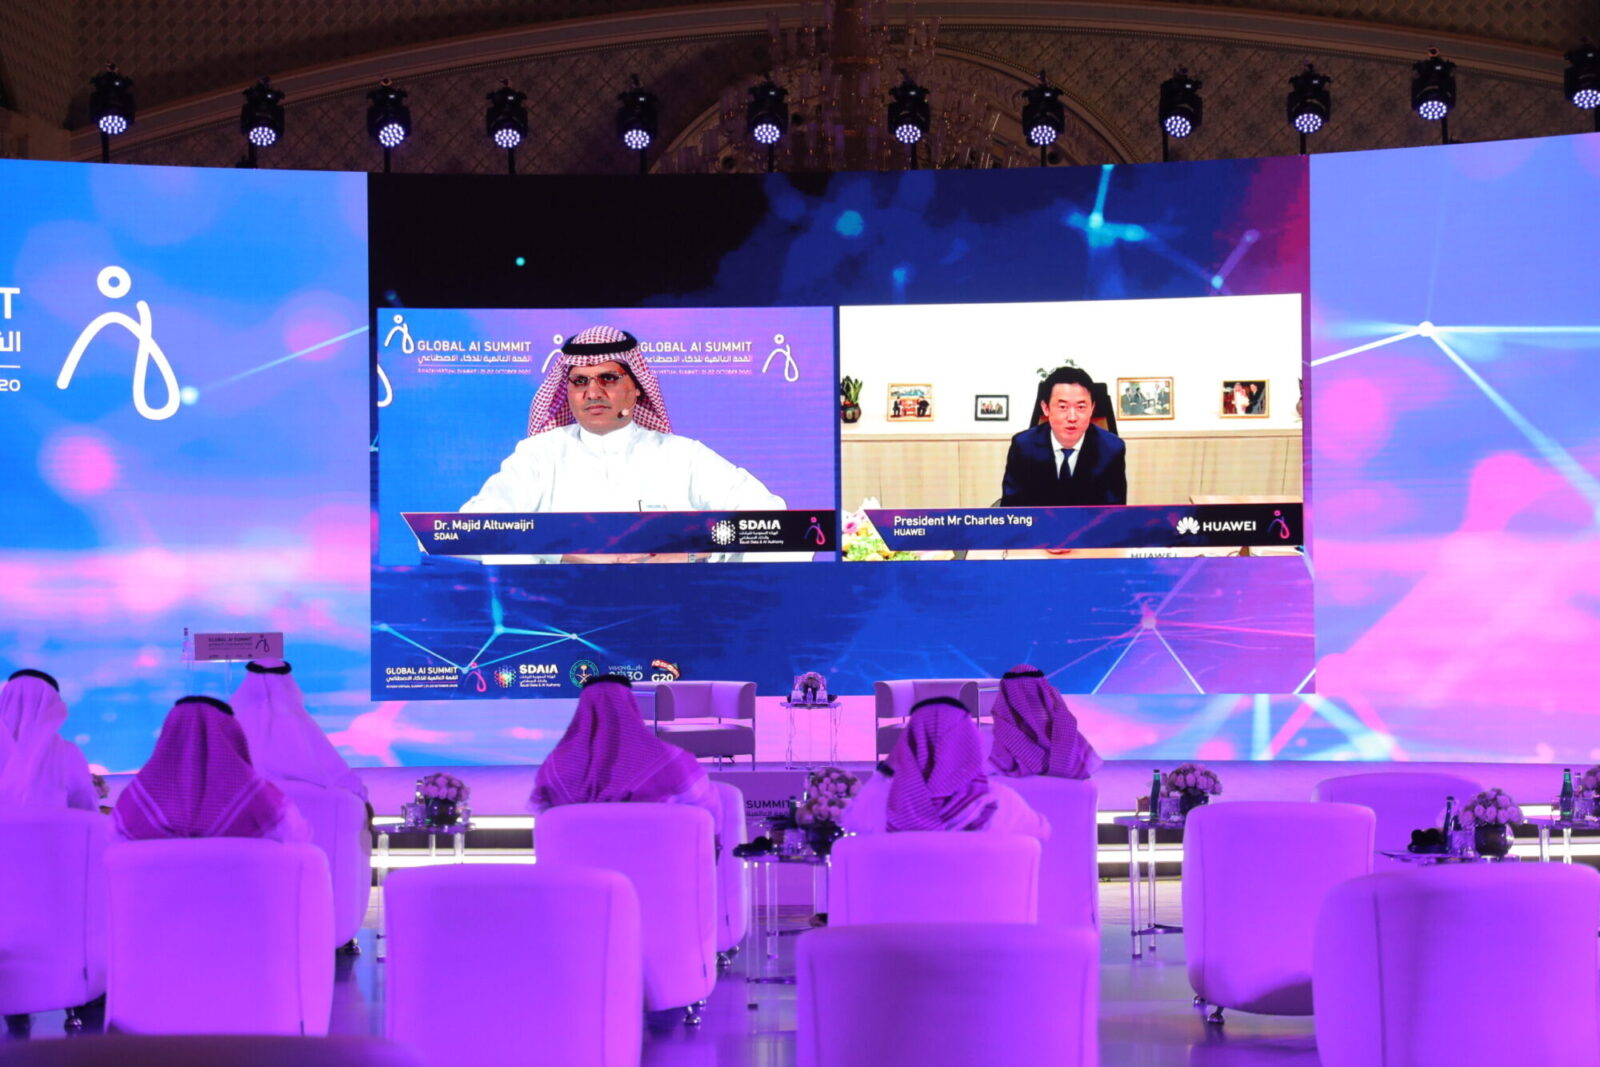 National Center For Artificial Intelligence And Huawei Announces MoU To Develop Saudi Arabia’s AI Capabilities